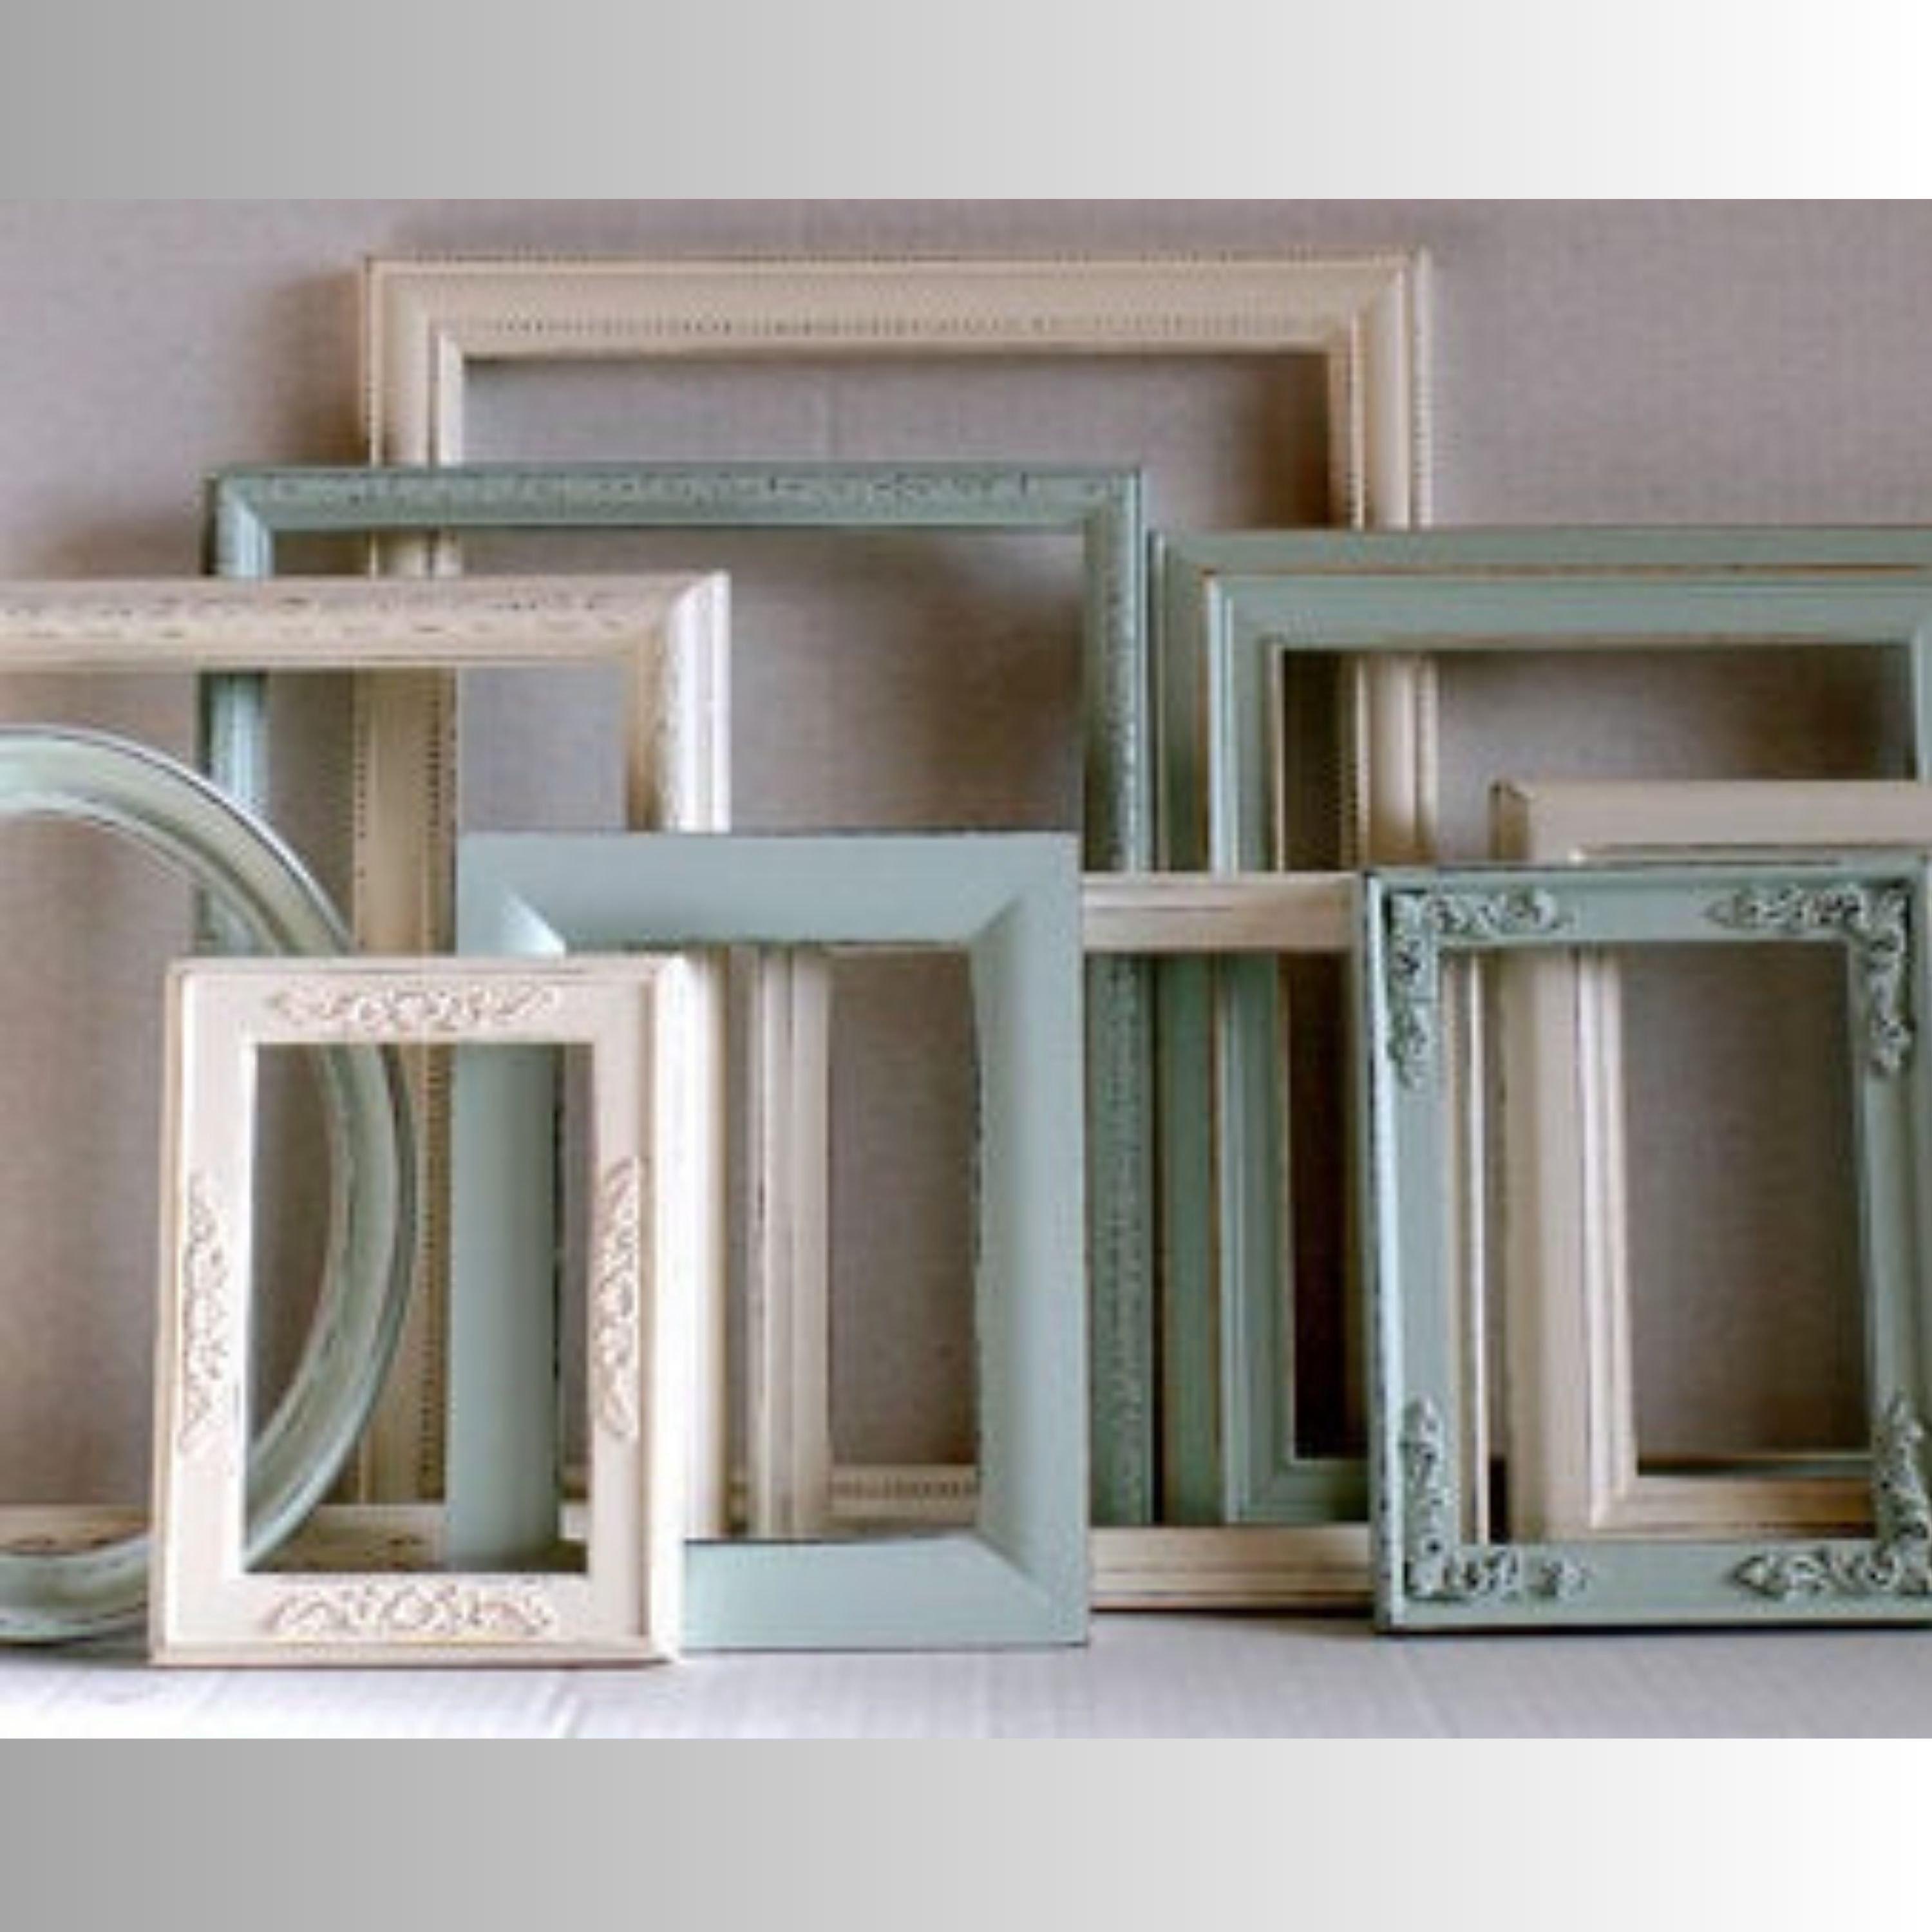 4x6 Picture Photo Frame [Always and Forever] Theme, Vertical, 4x6 Without  Mat and 2.5x4 with Mat, Weathered Green